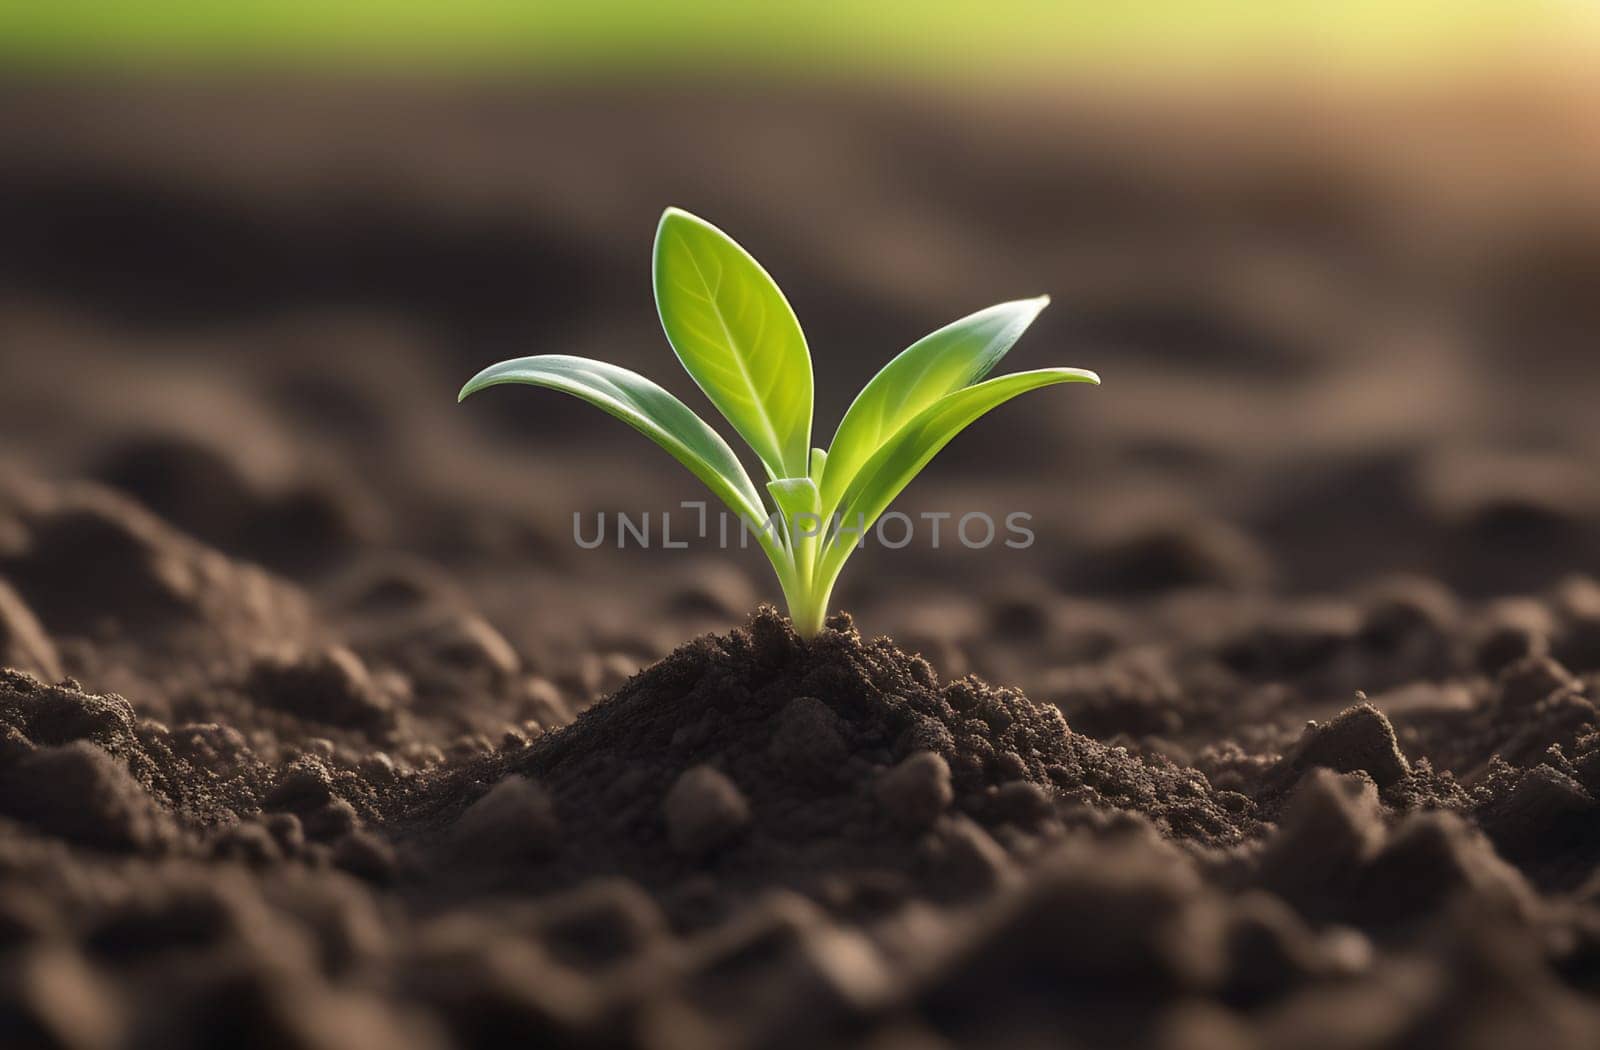 A small plant growing on the soil, the concept of the surrounding world and Earth Day by claire_lucia